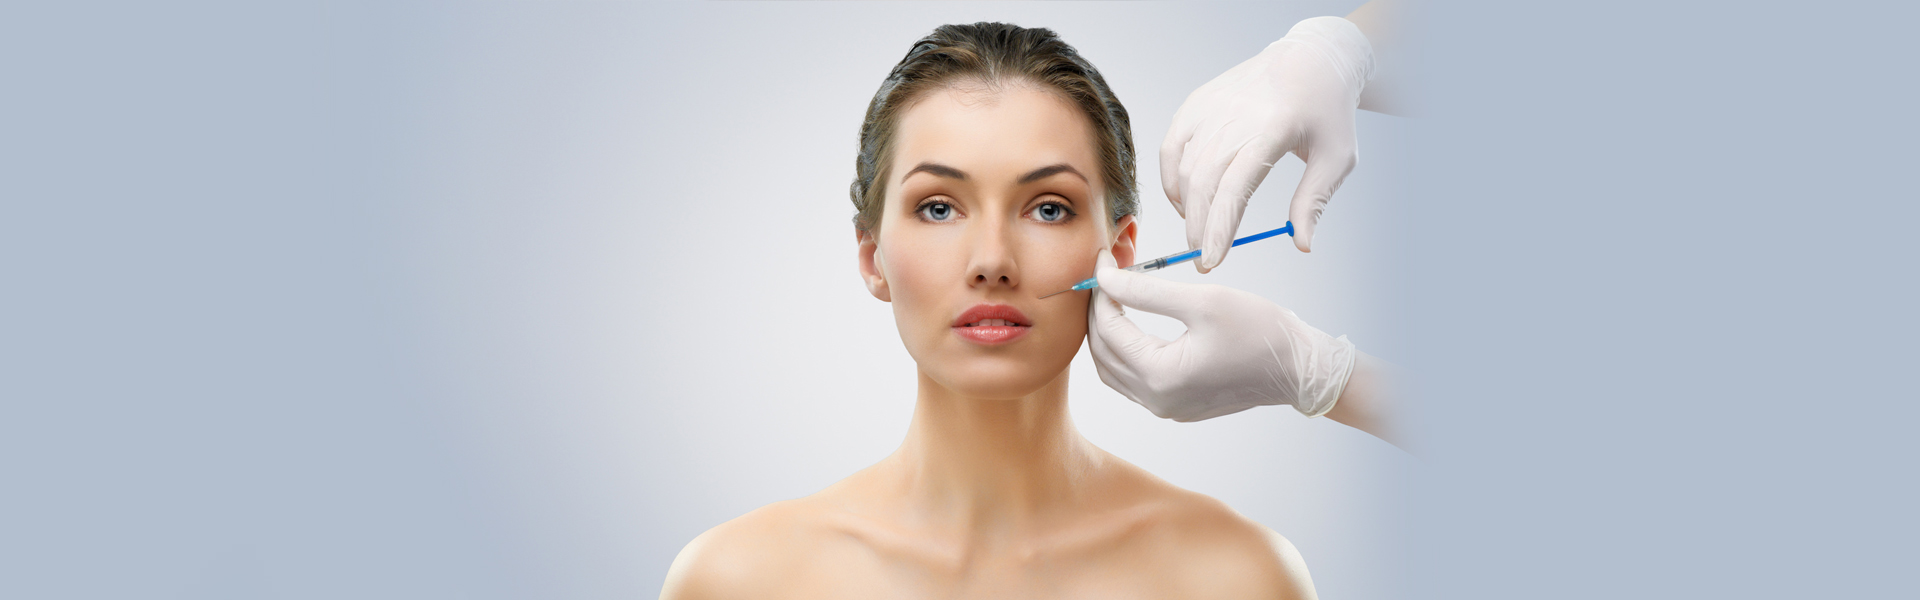 Cosmetic Injections 101: All You Need to Know